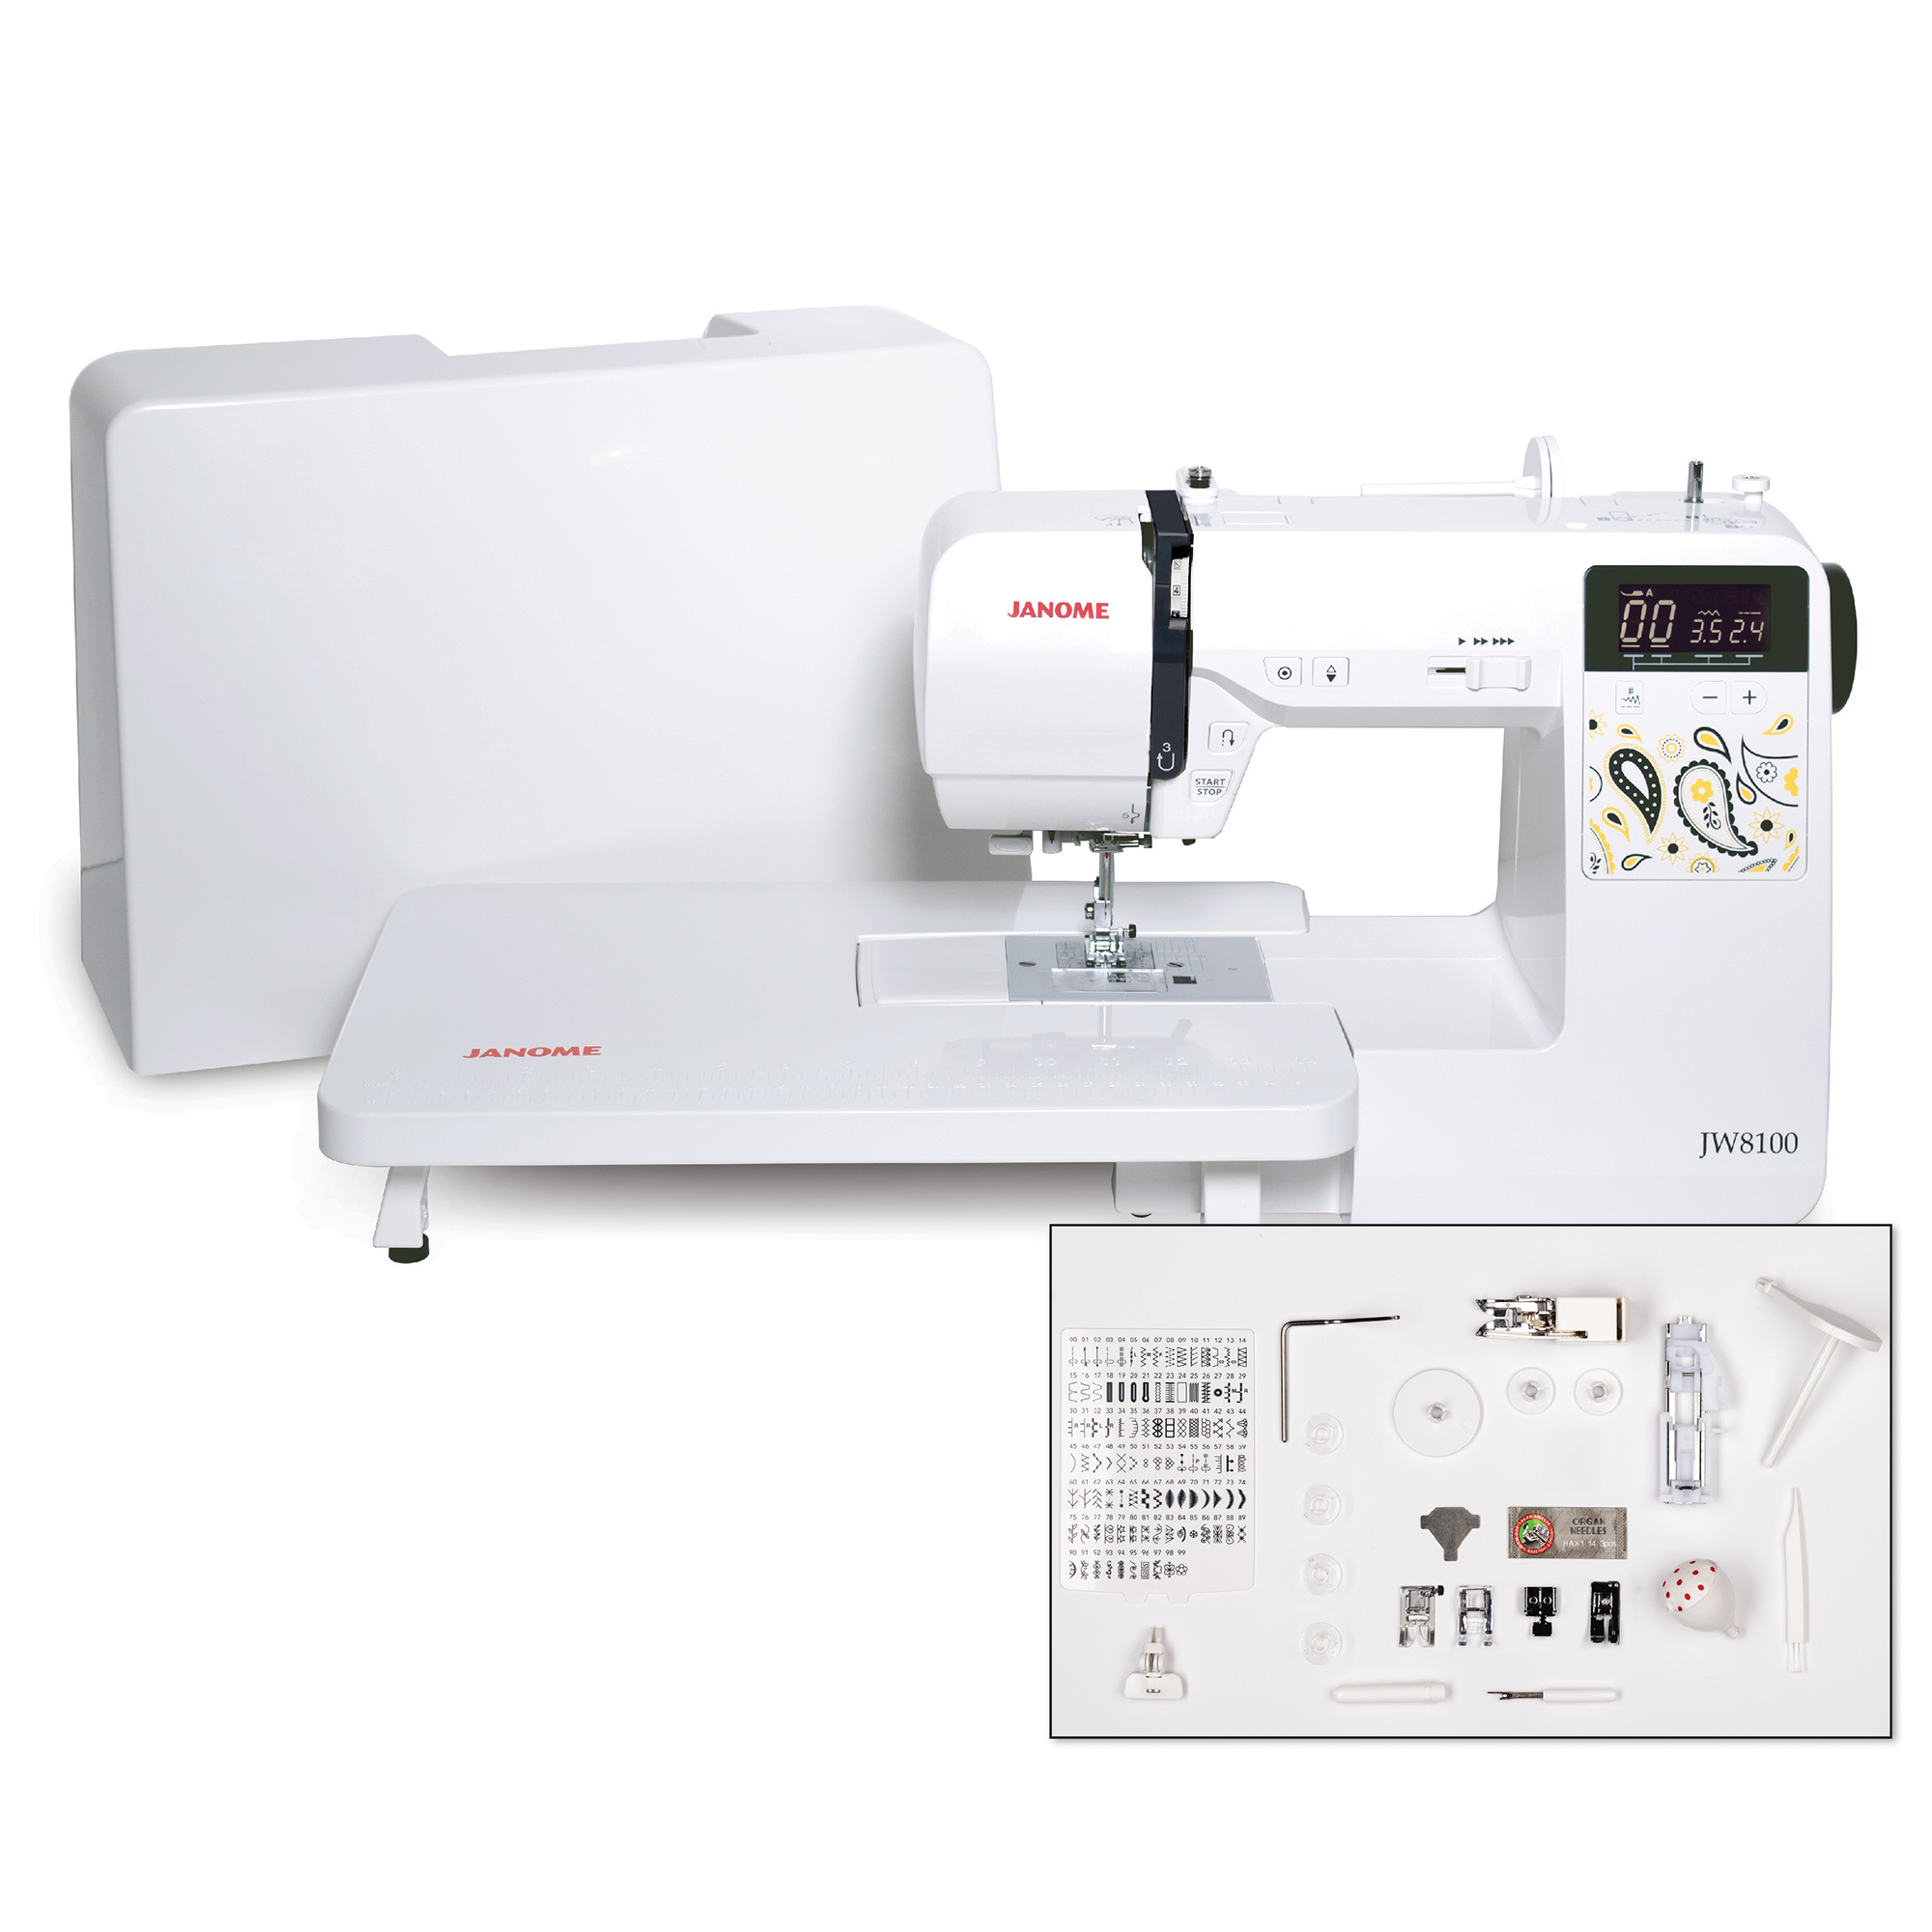 Janome JW8100 Fully-Featured Computerized Sewing Machine with 100 Stitches, 7 Buttonholes, Hard Cover, Extension Table and 22 Accessories - image 3 of 12